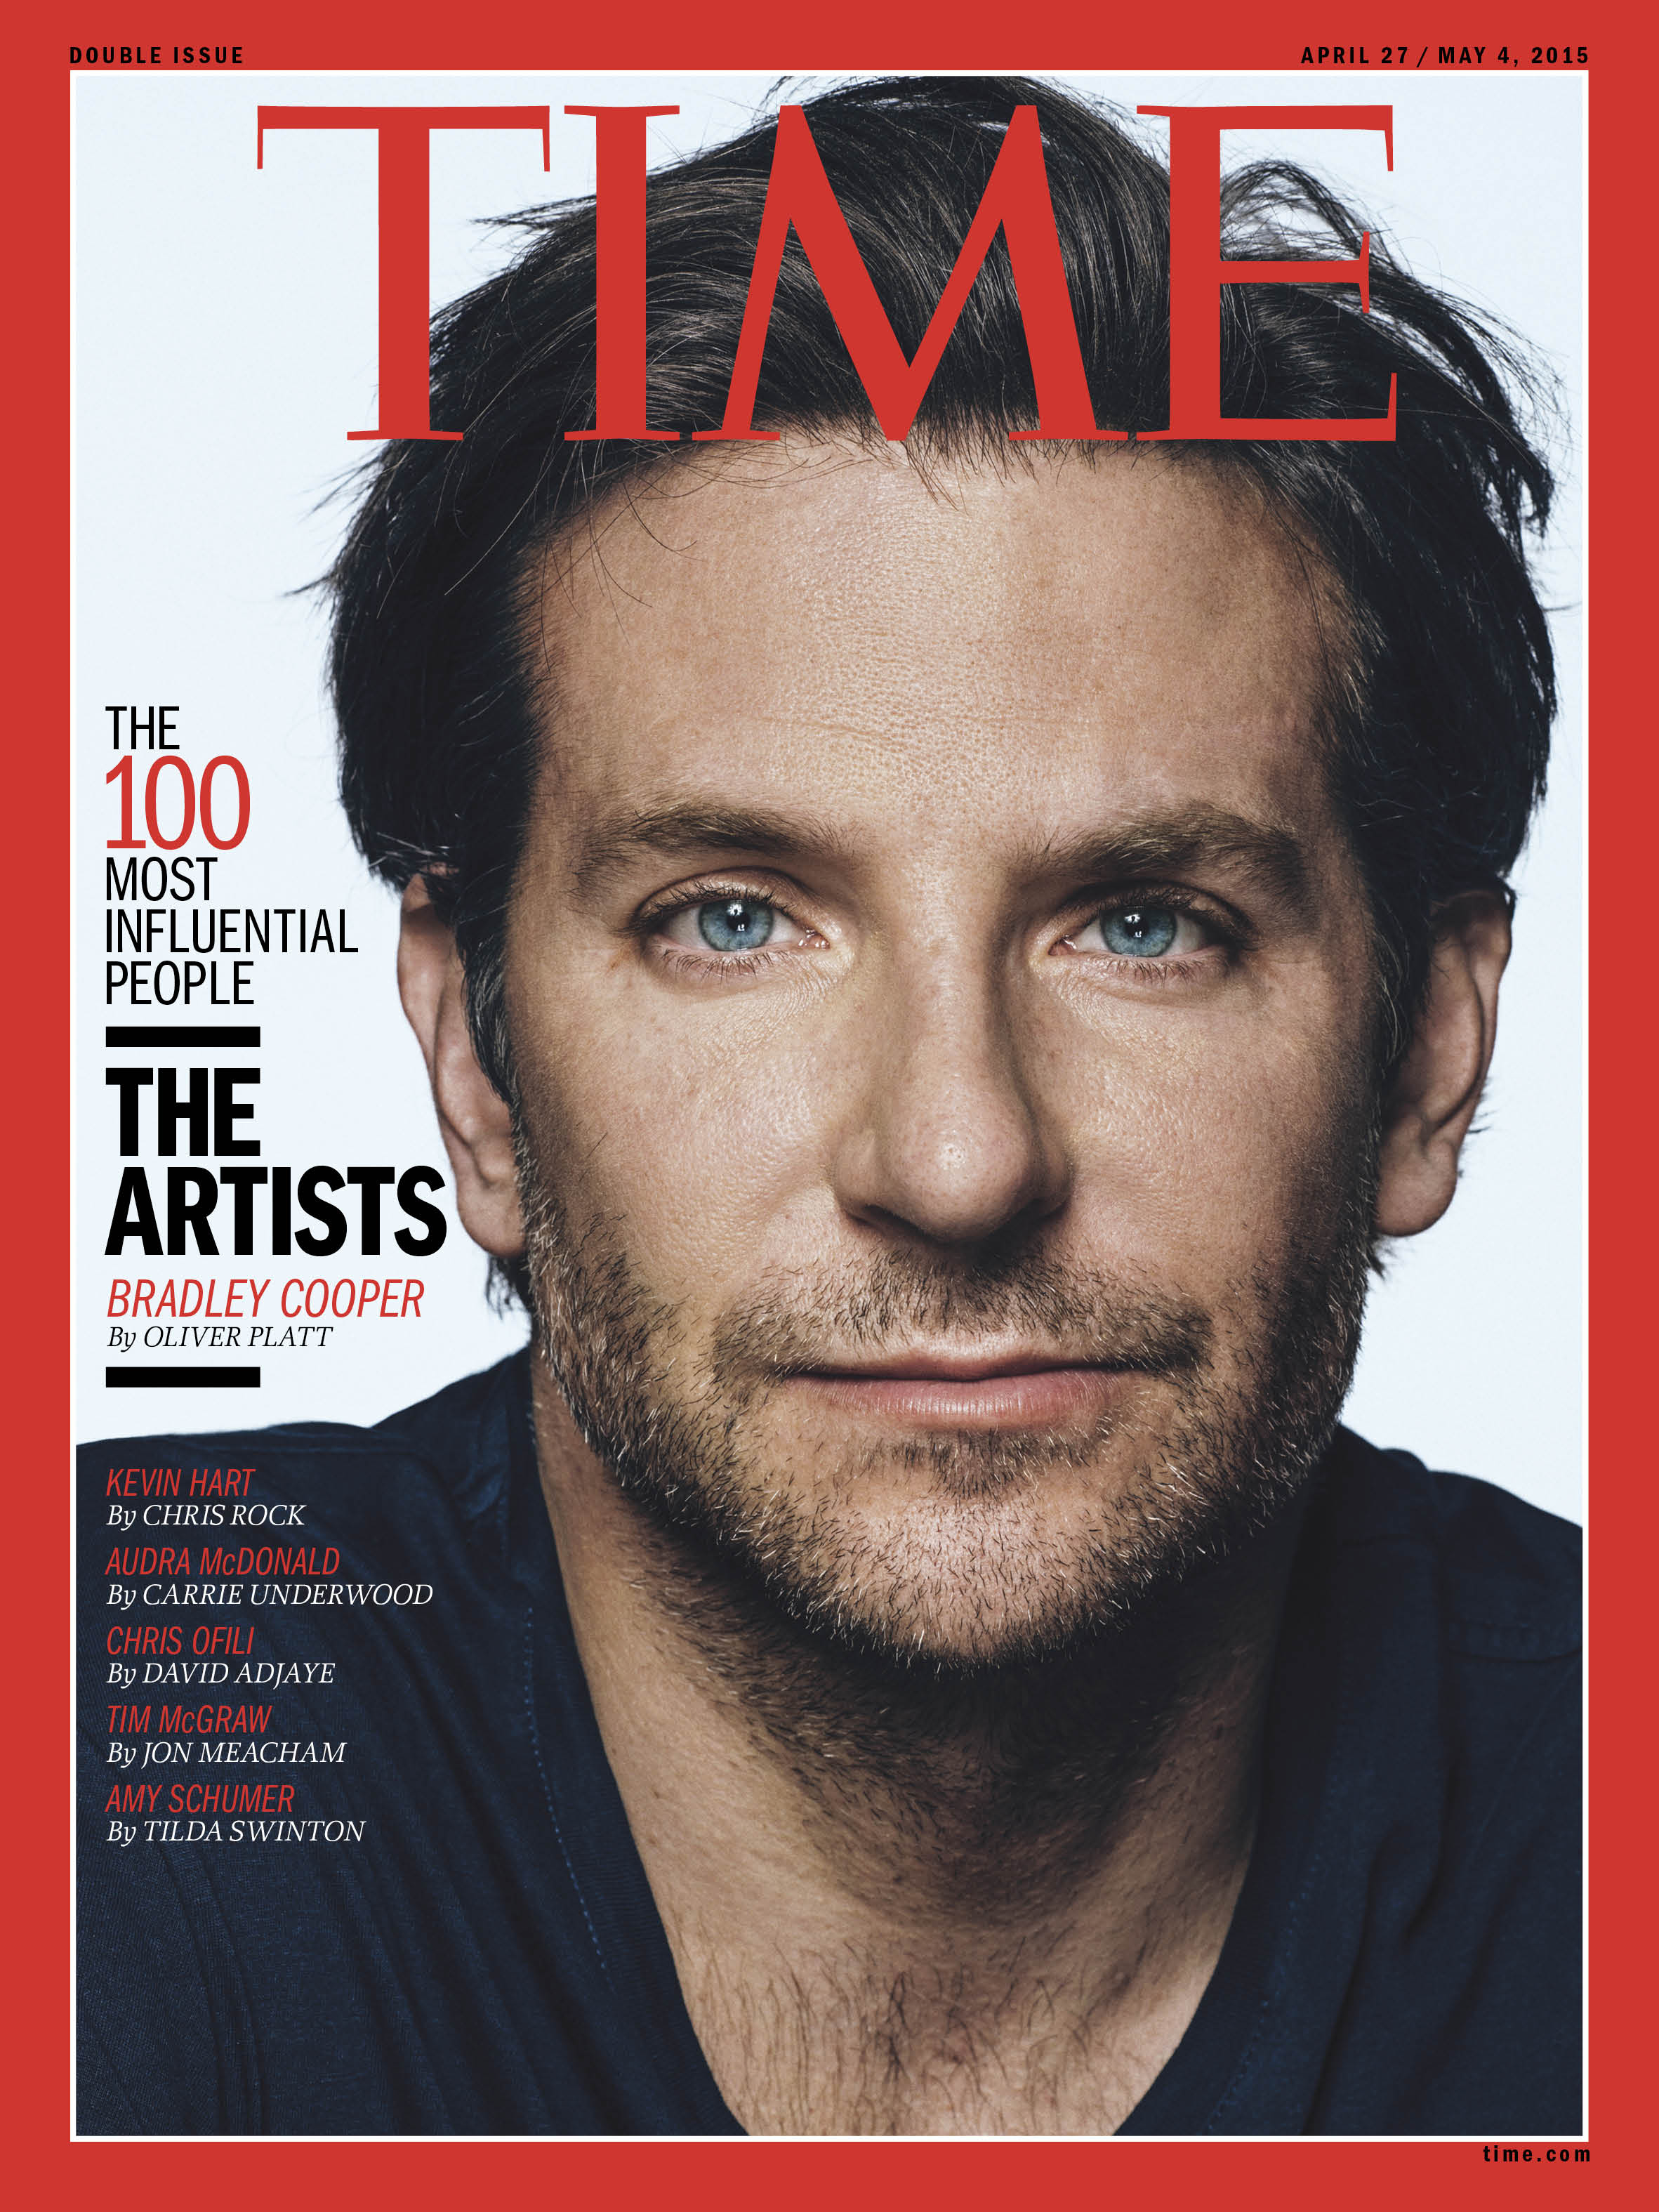 Bradley Cooper stars in new campaign for Louis Vuitton Tambour